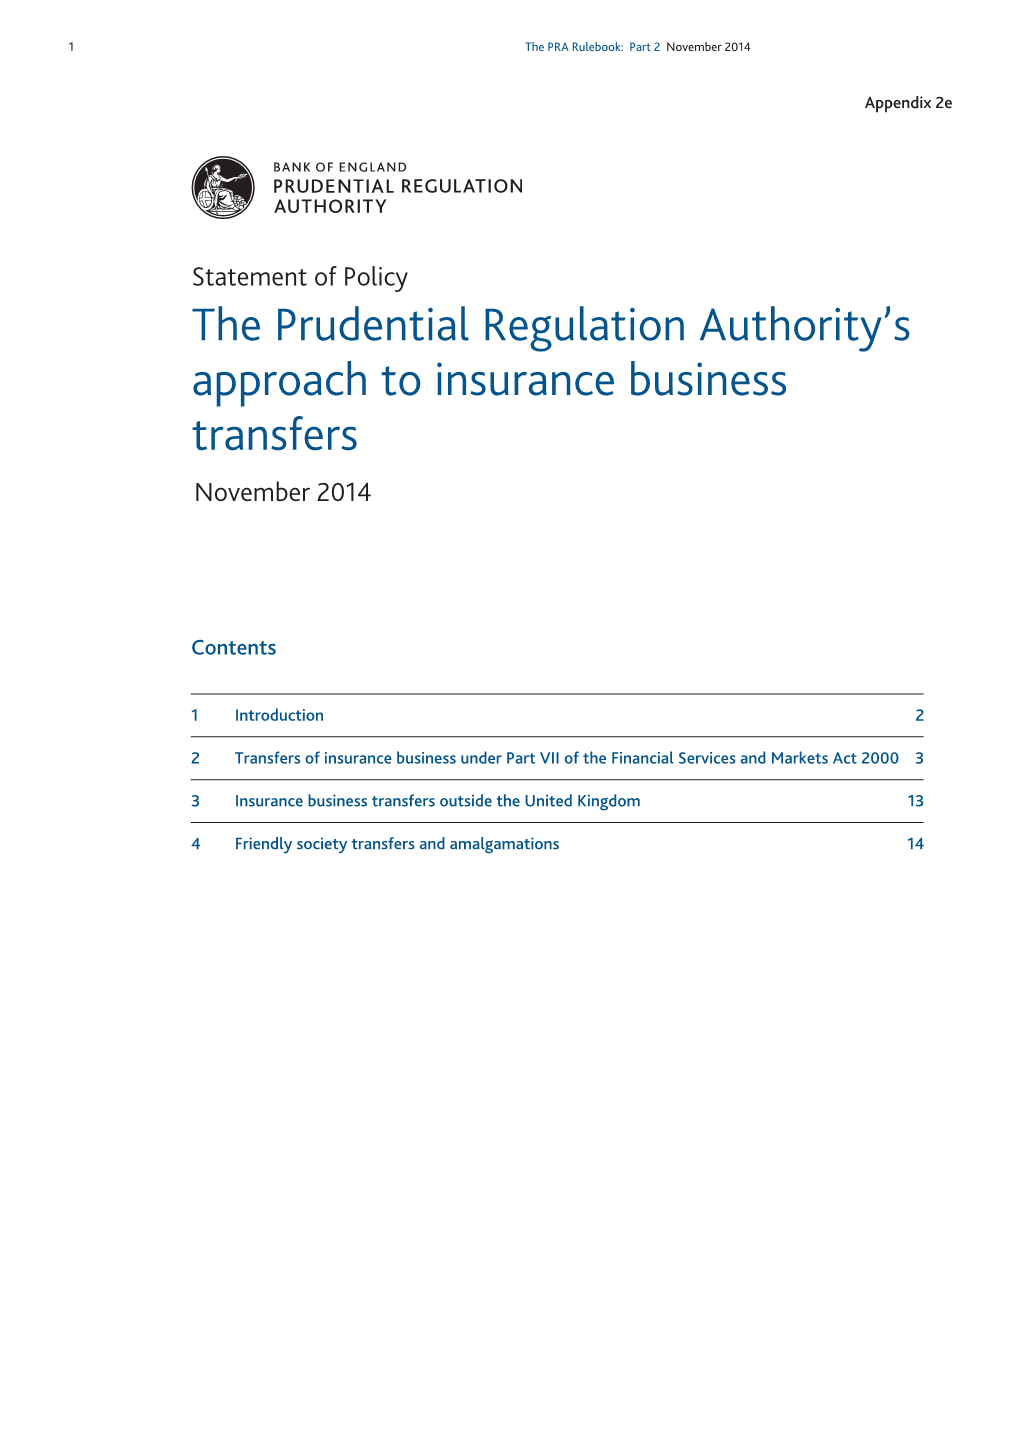 Statement of Policy the Prudential Regulation Authority's Approach To